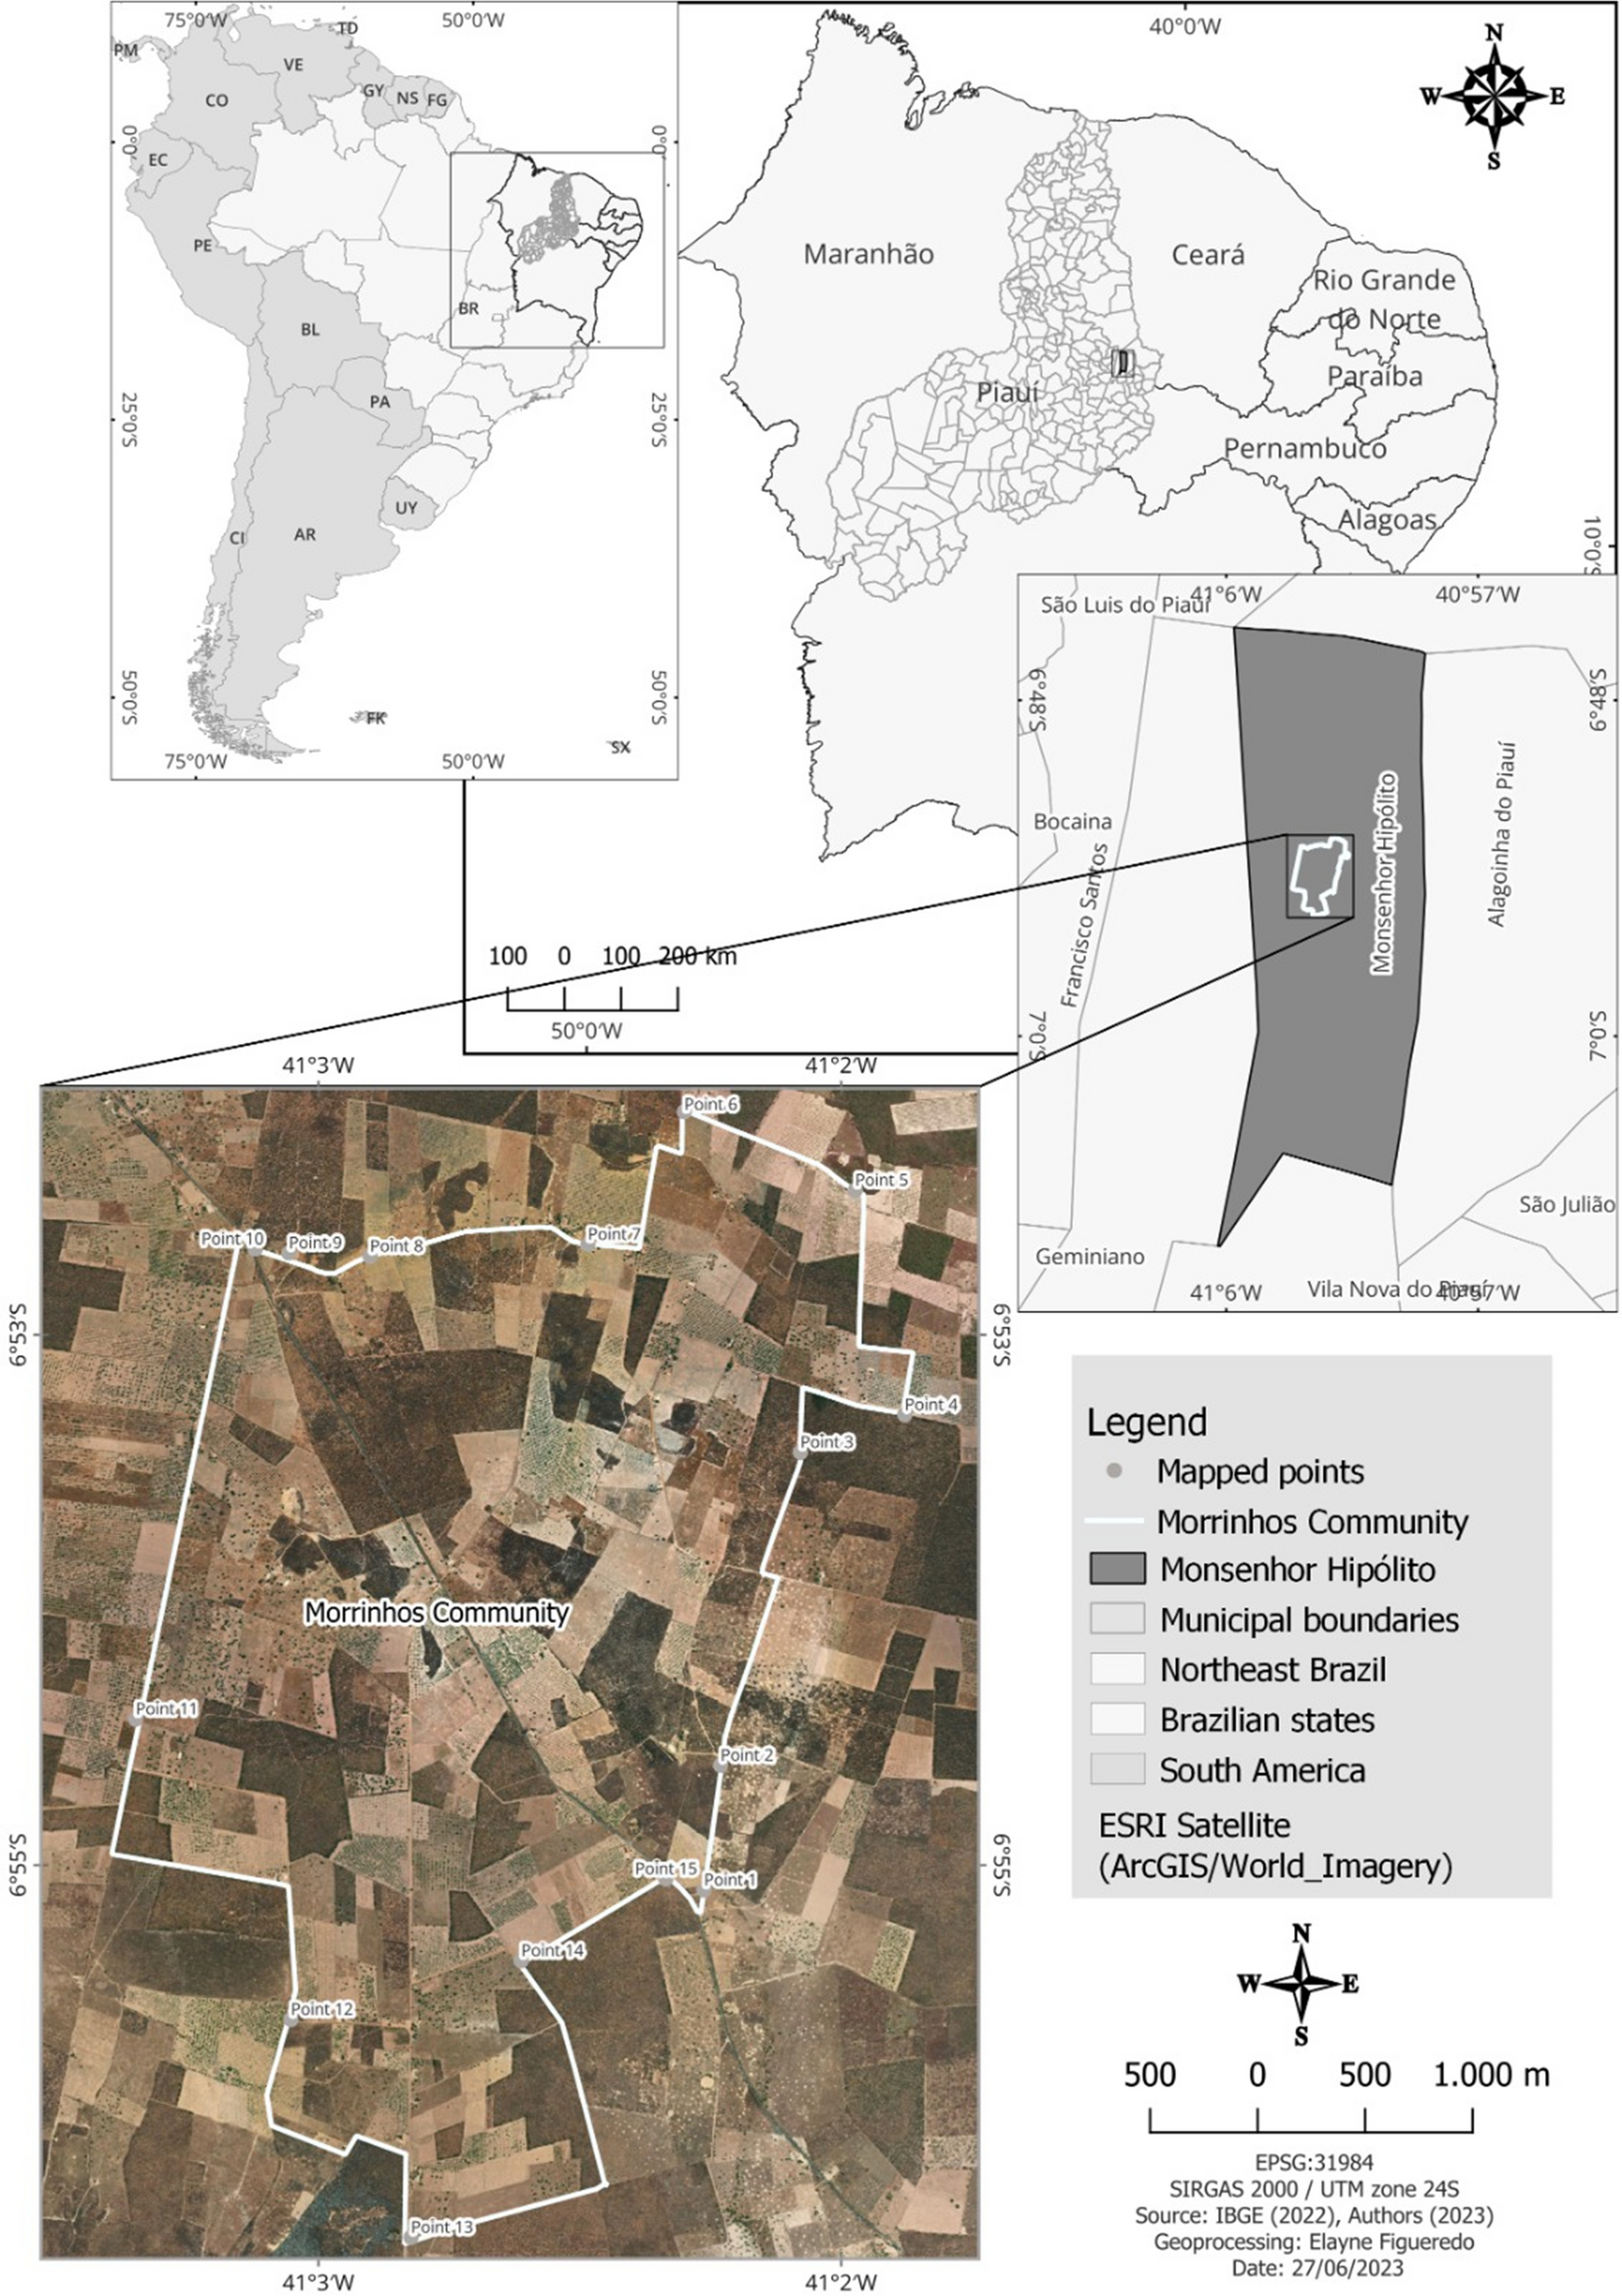 The influence of exotic and native plants on illnesses with physical and spiritual causes in the semiarid region of Piauí, Northeast of Brazil